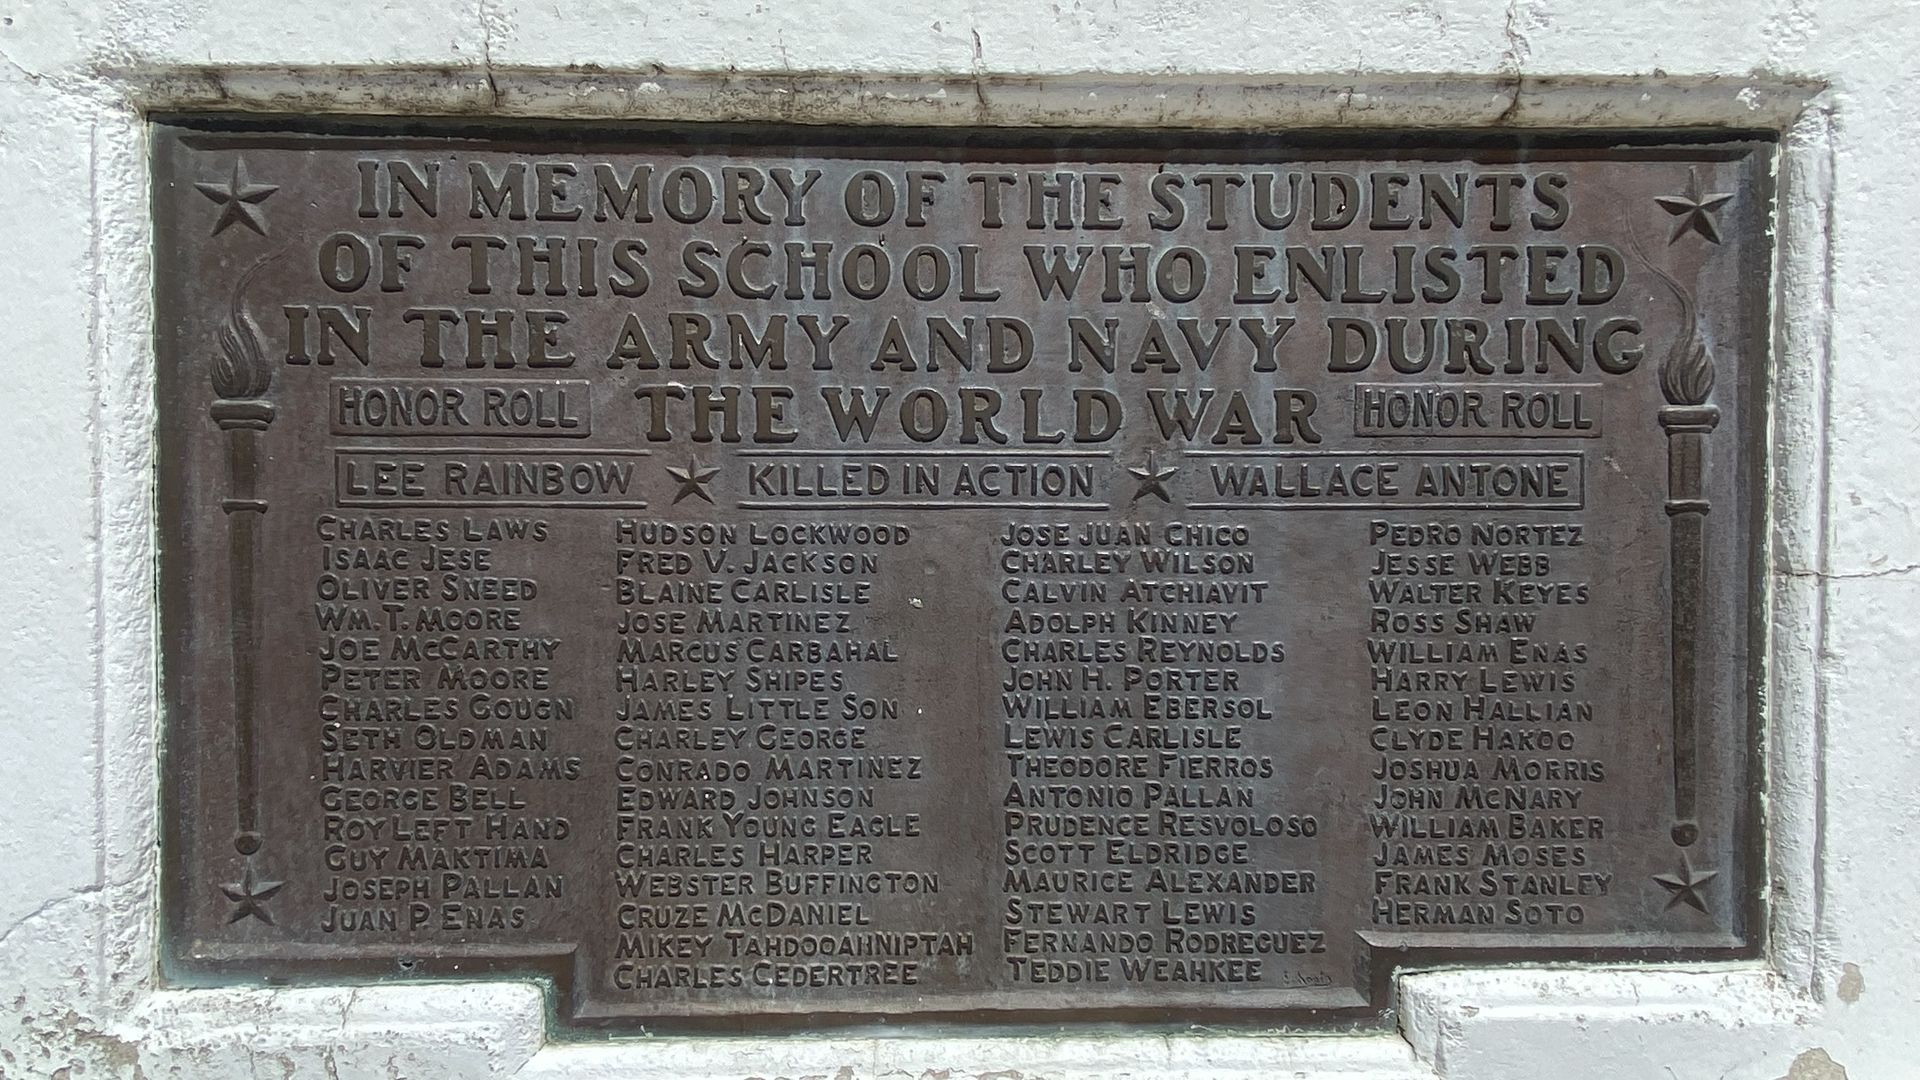 A plaque dedicated to students who enlisted during World War I.